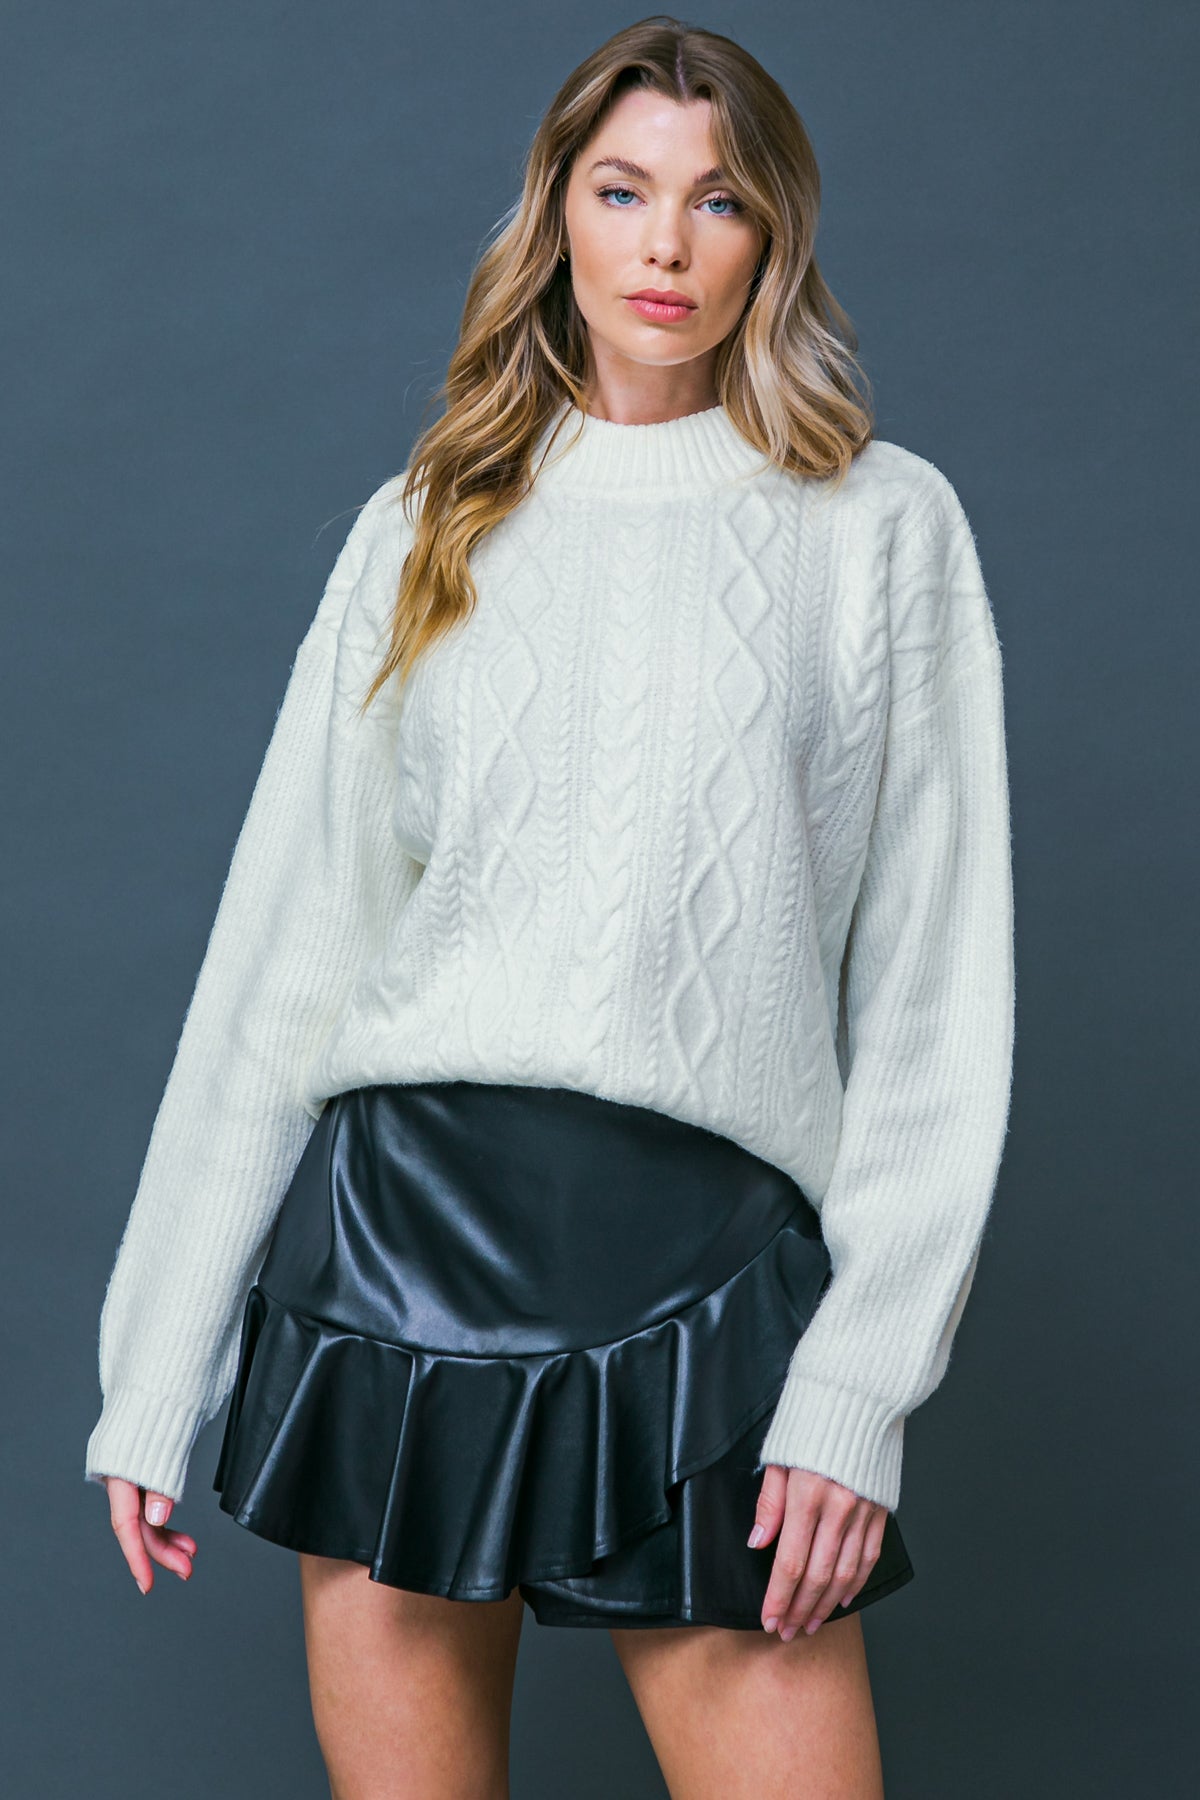 Make your fairytale dreams come true with this Snow White inspired knit. With a mock neck, long sleeve, and relaxed body, this sweater will have you feeling cozy and cute! 